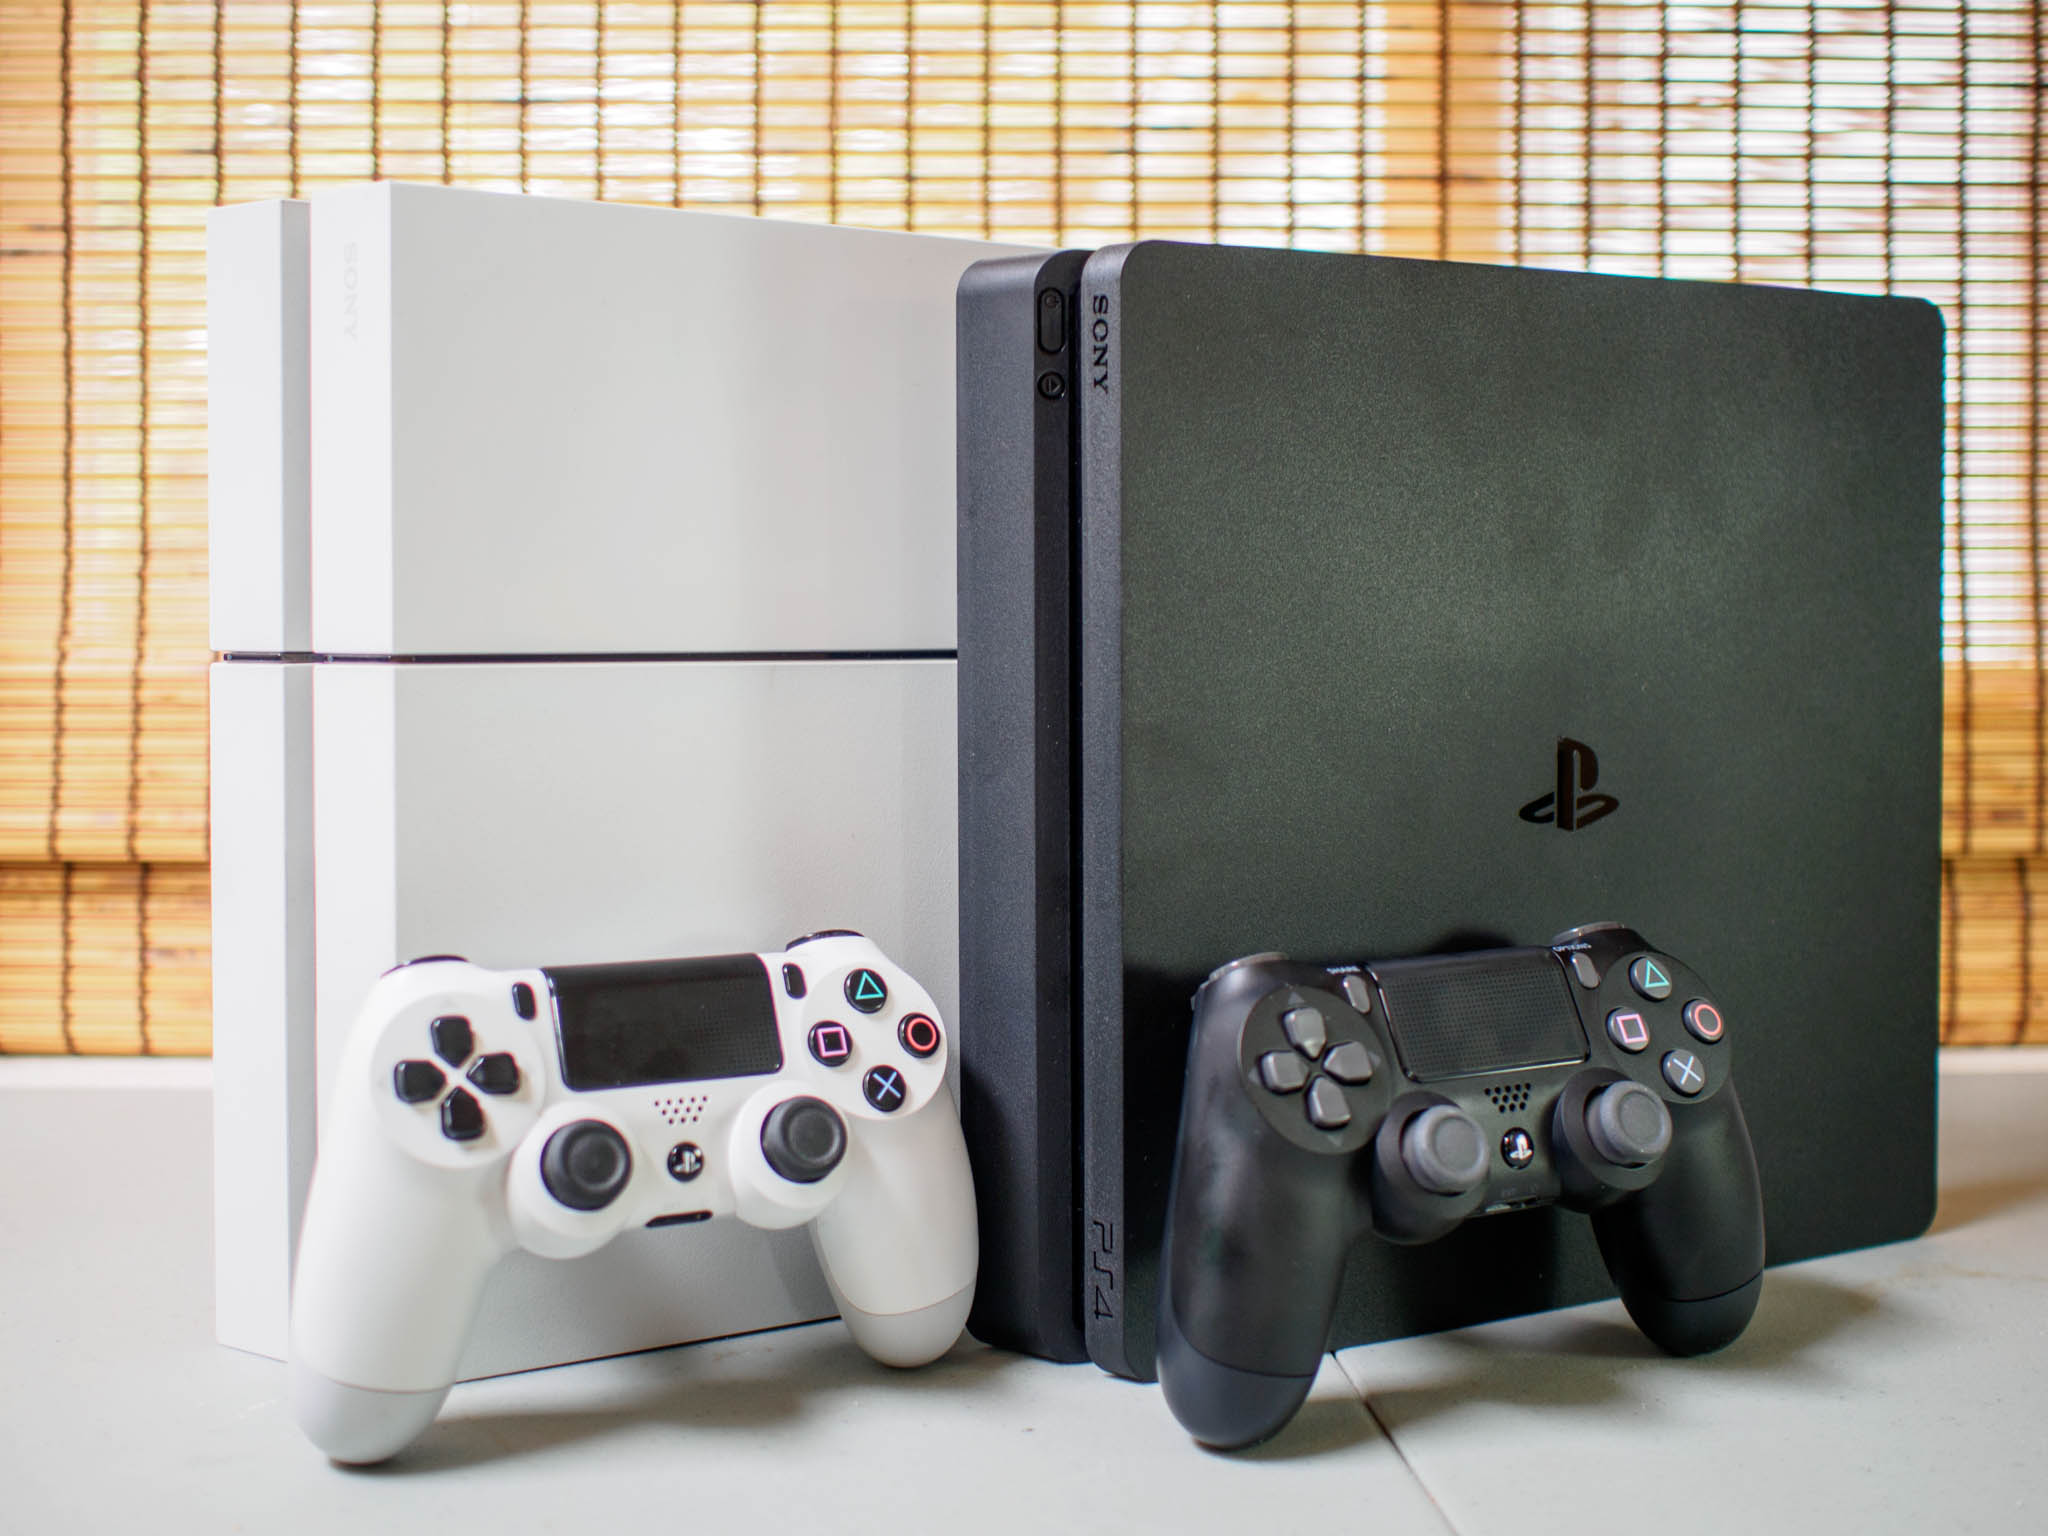 PS4 Slim: Everything You Should Know About the New PlayStation 4